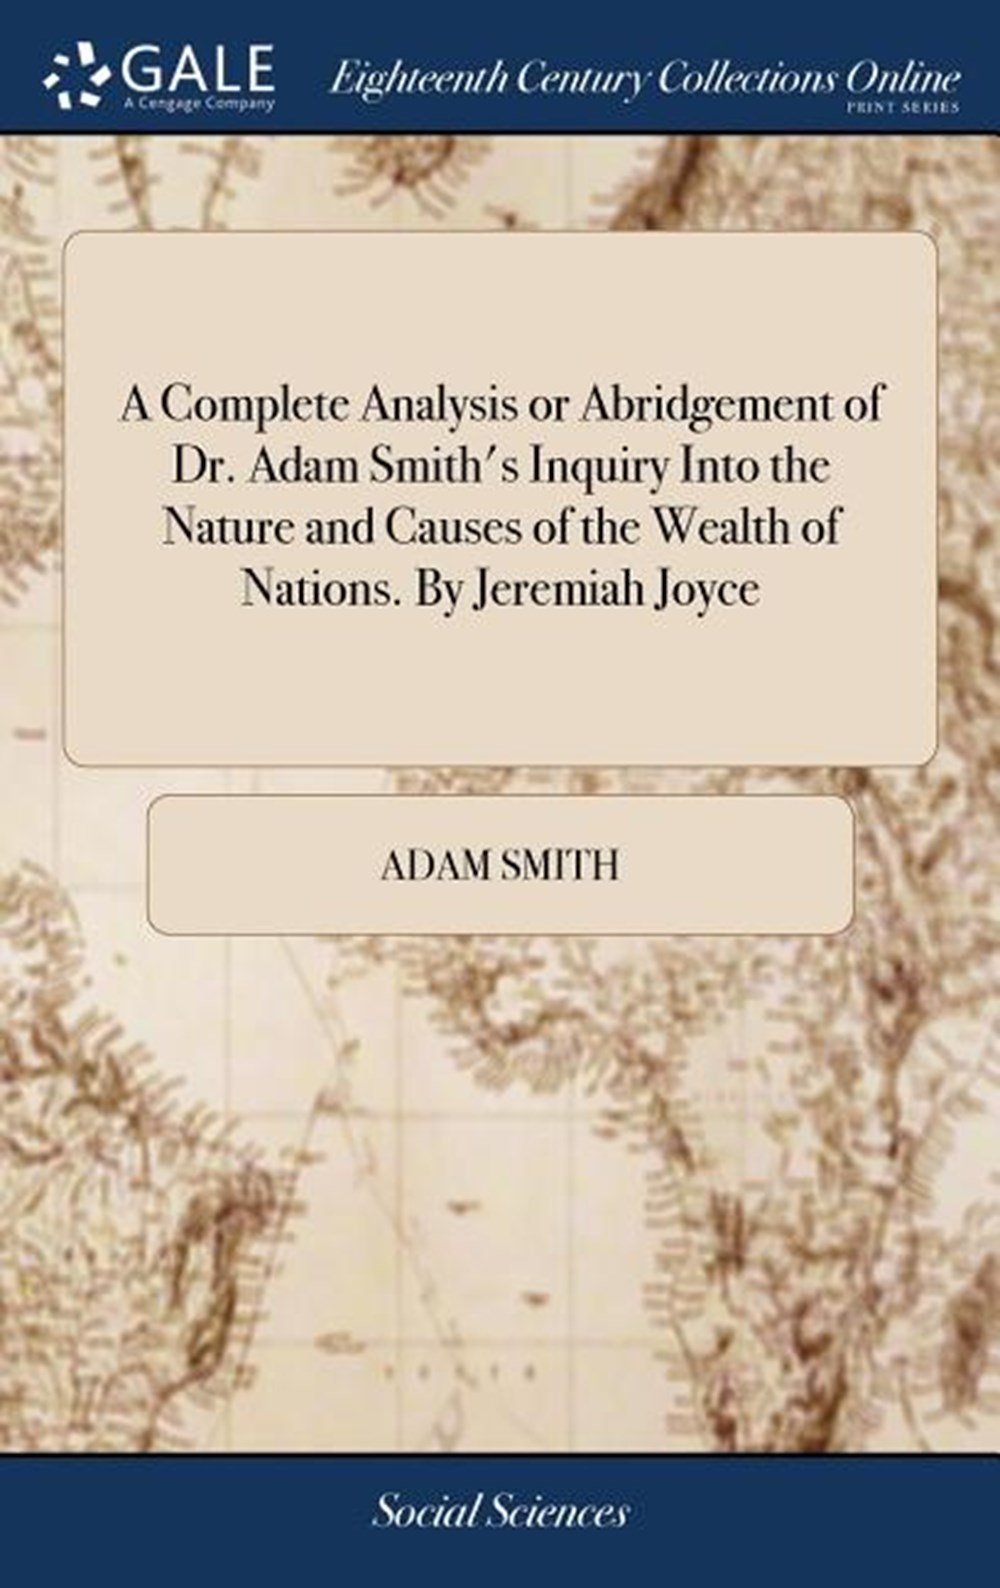 Complete Analysis or Abridgement of Dr. Adam Smith's Inquiry Into the Nature and Causes of the Wealt